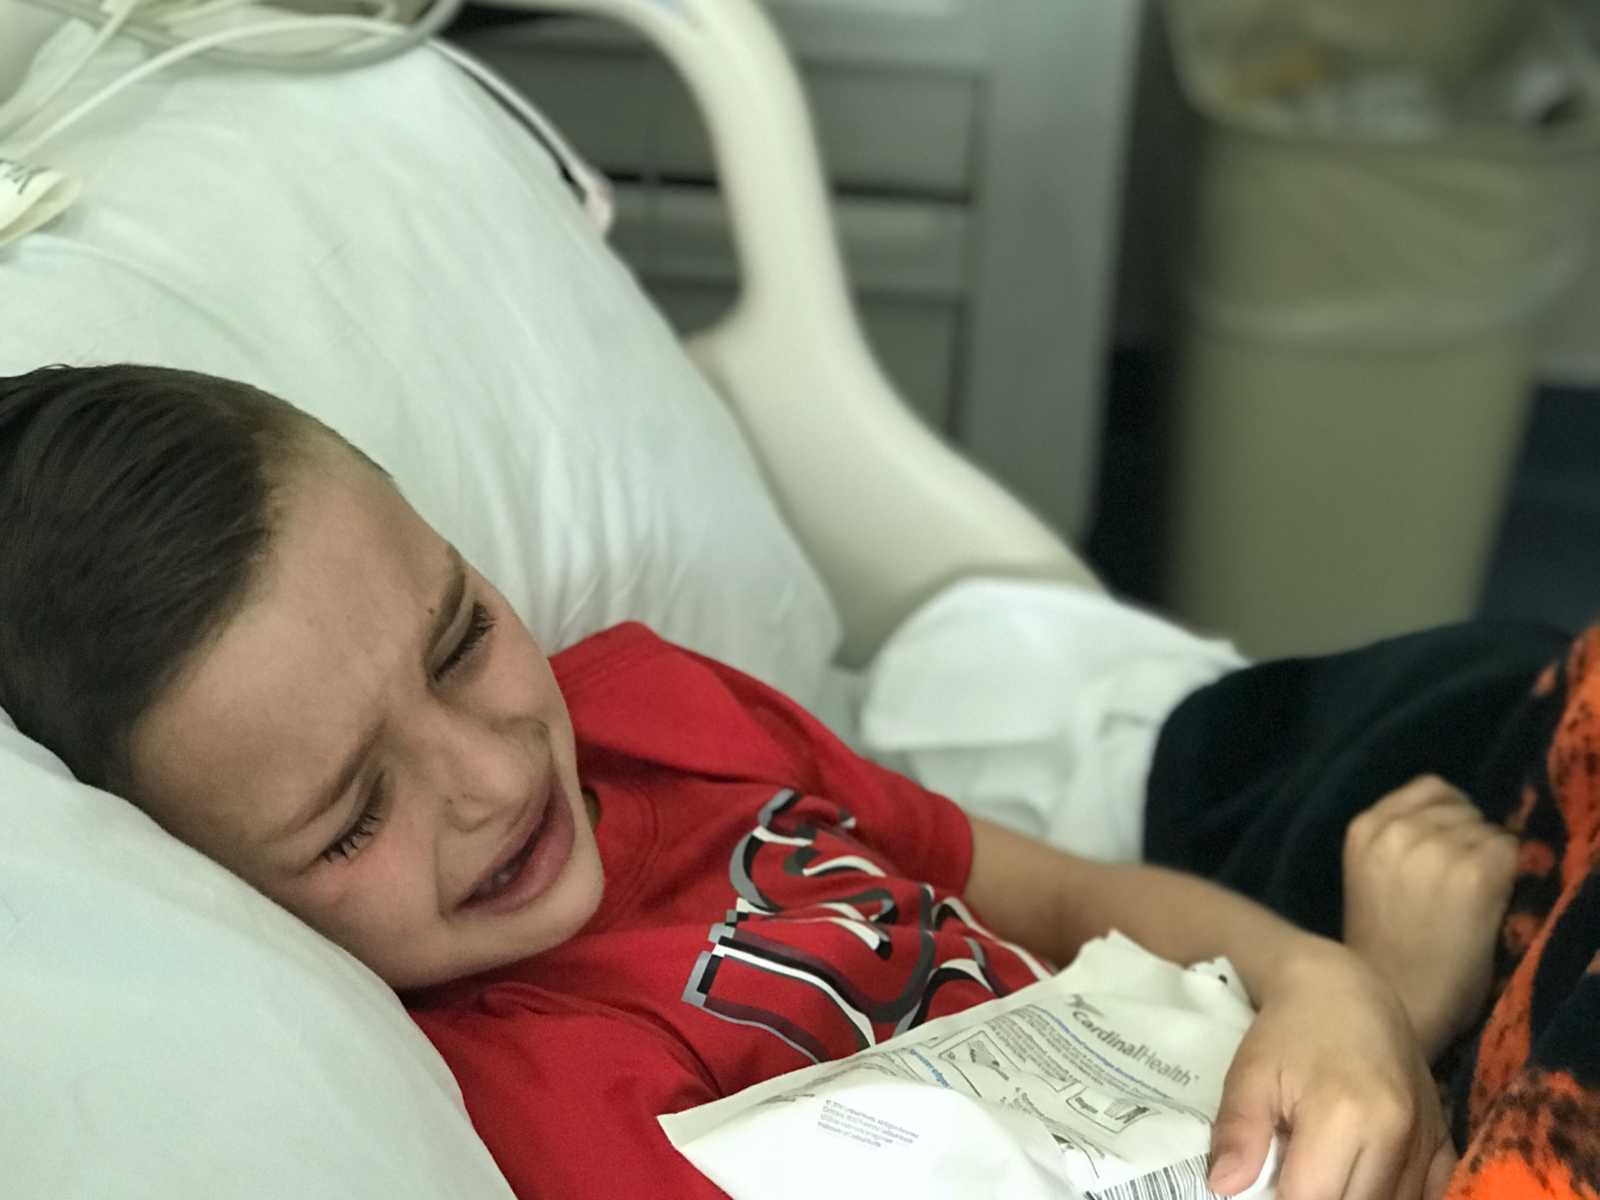 Little boy with leg tumors crying in hospital bed 